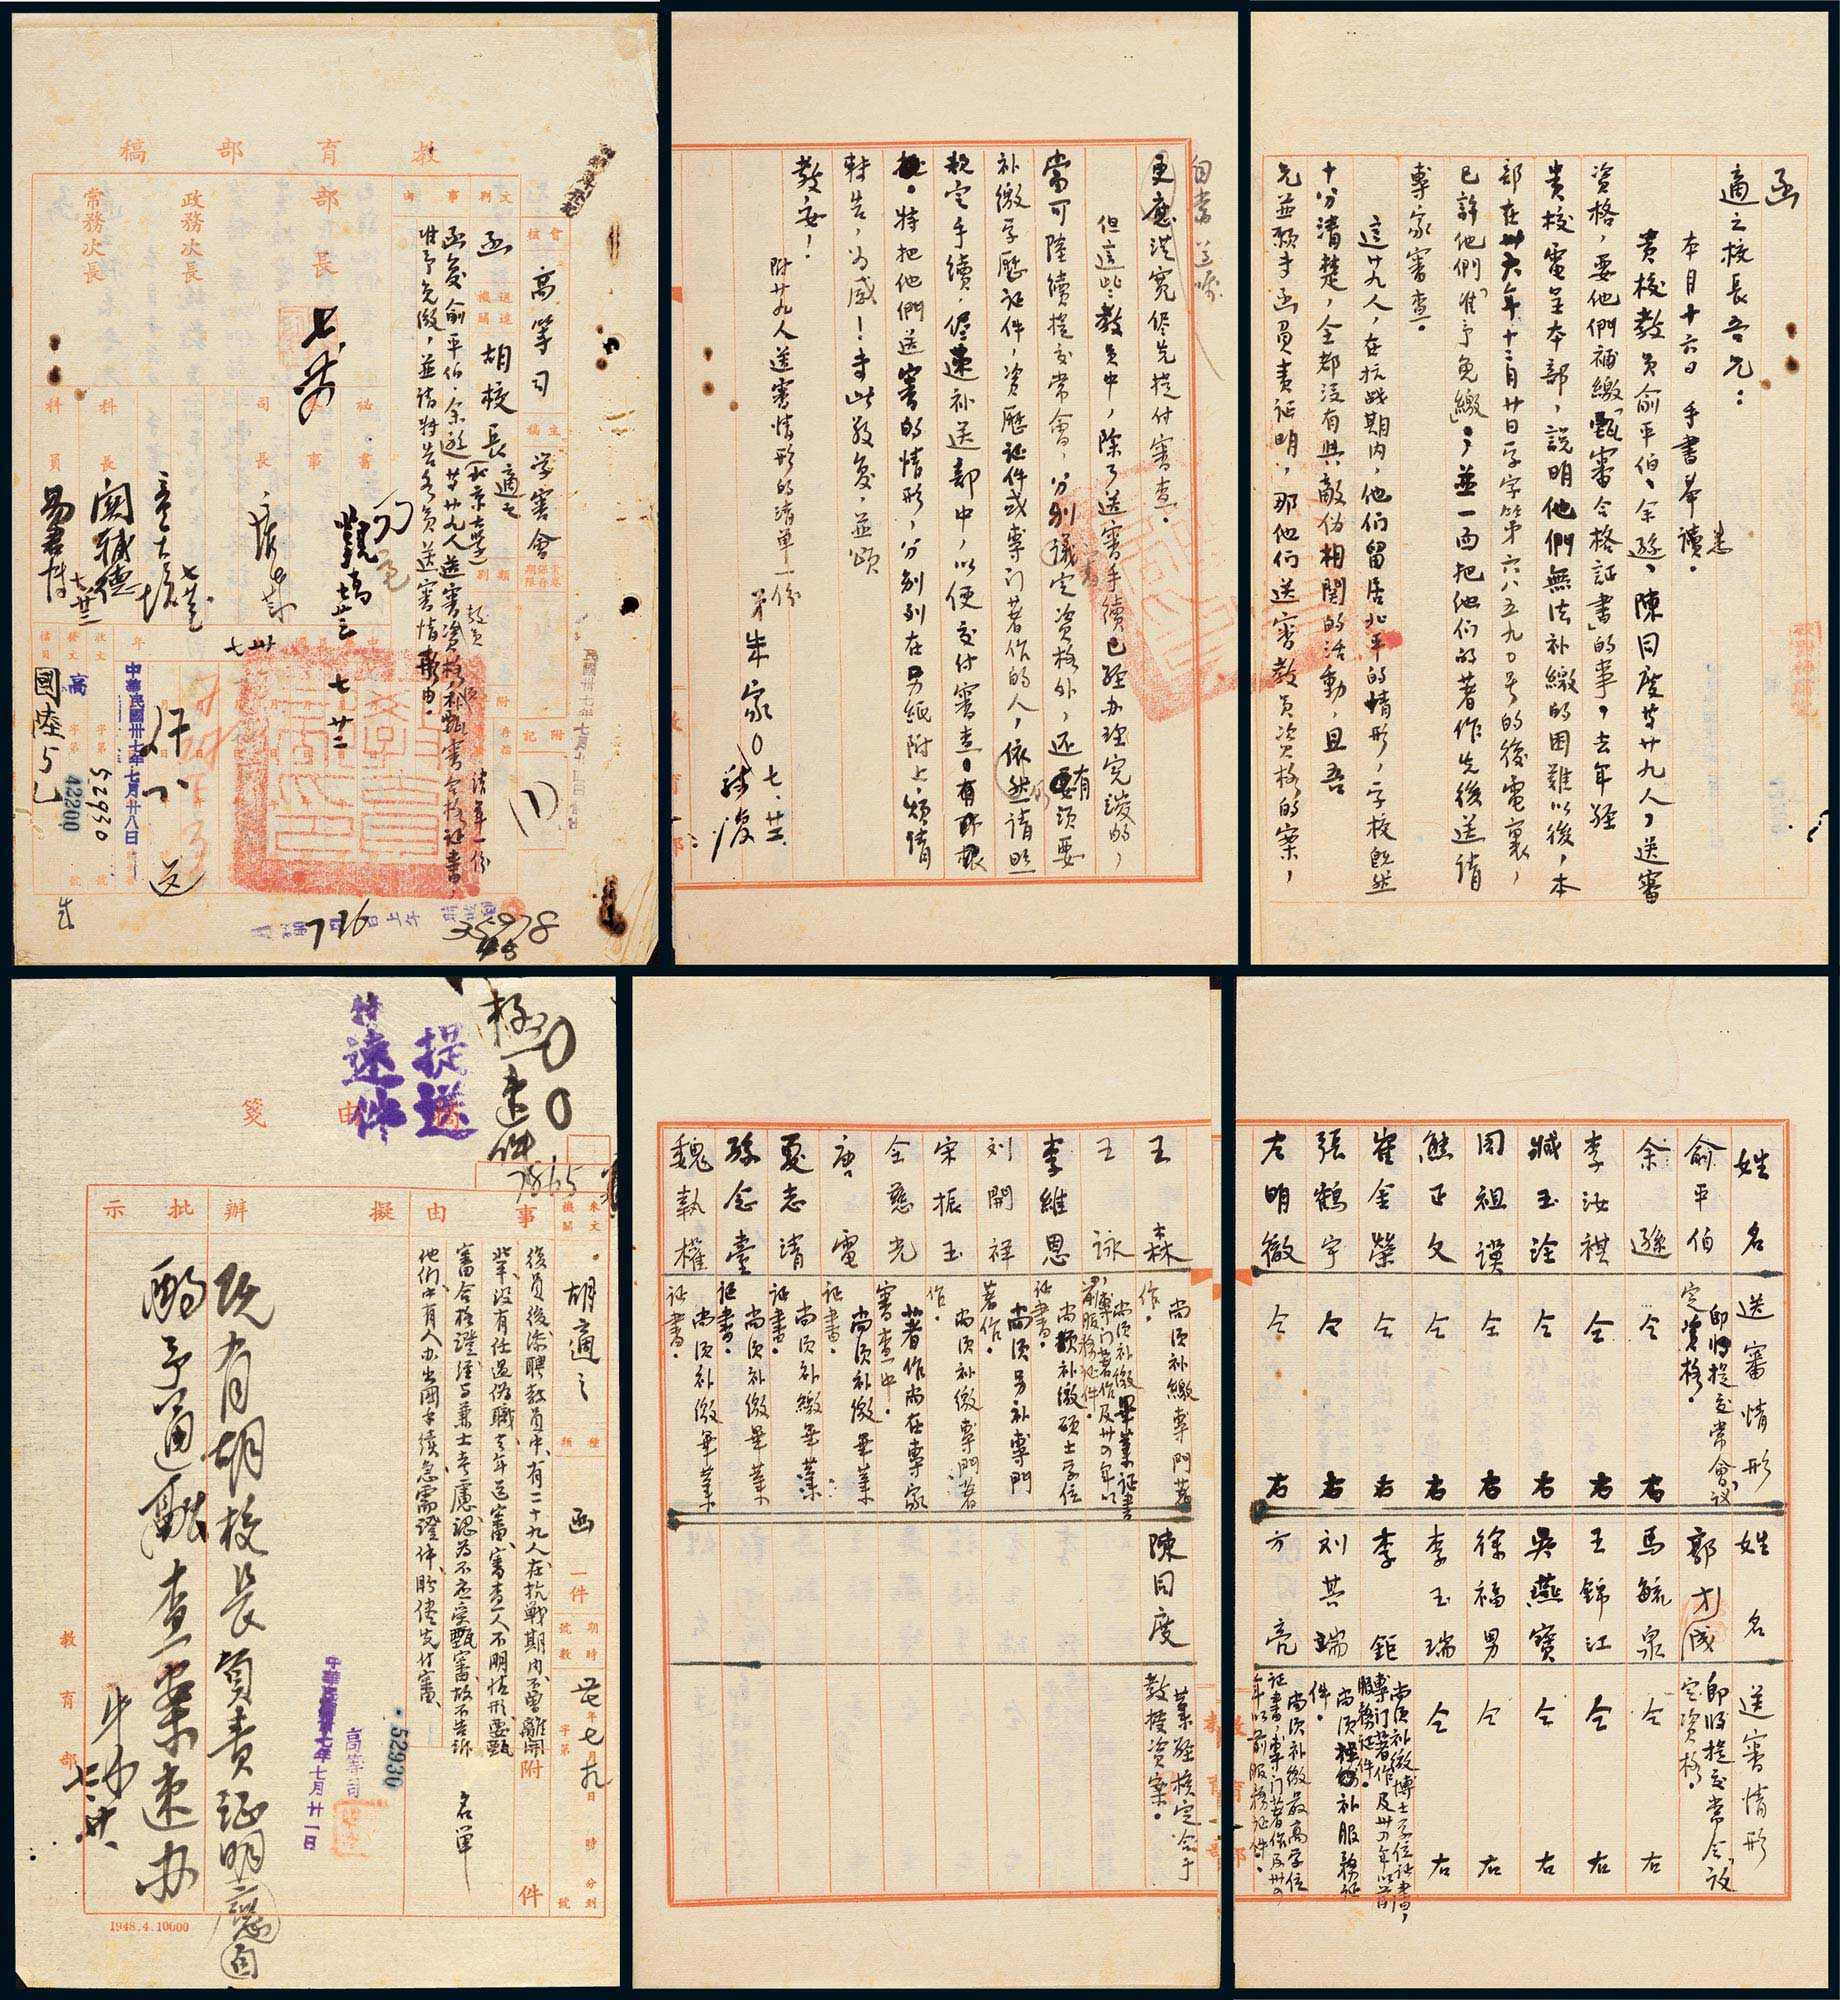 Zhu Jiahua’s letters, namelists and materials to Hu Shi in the thirty-seventh year of the Republic of China (1948)